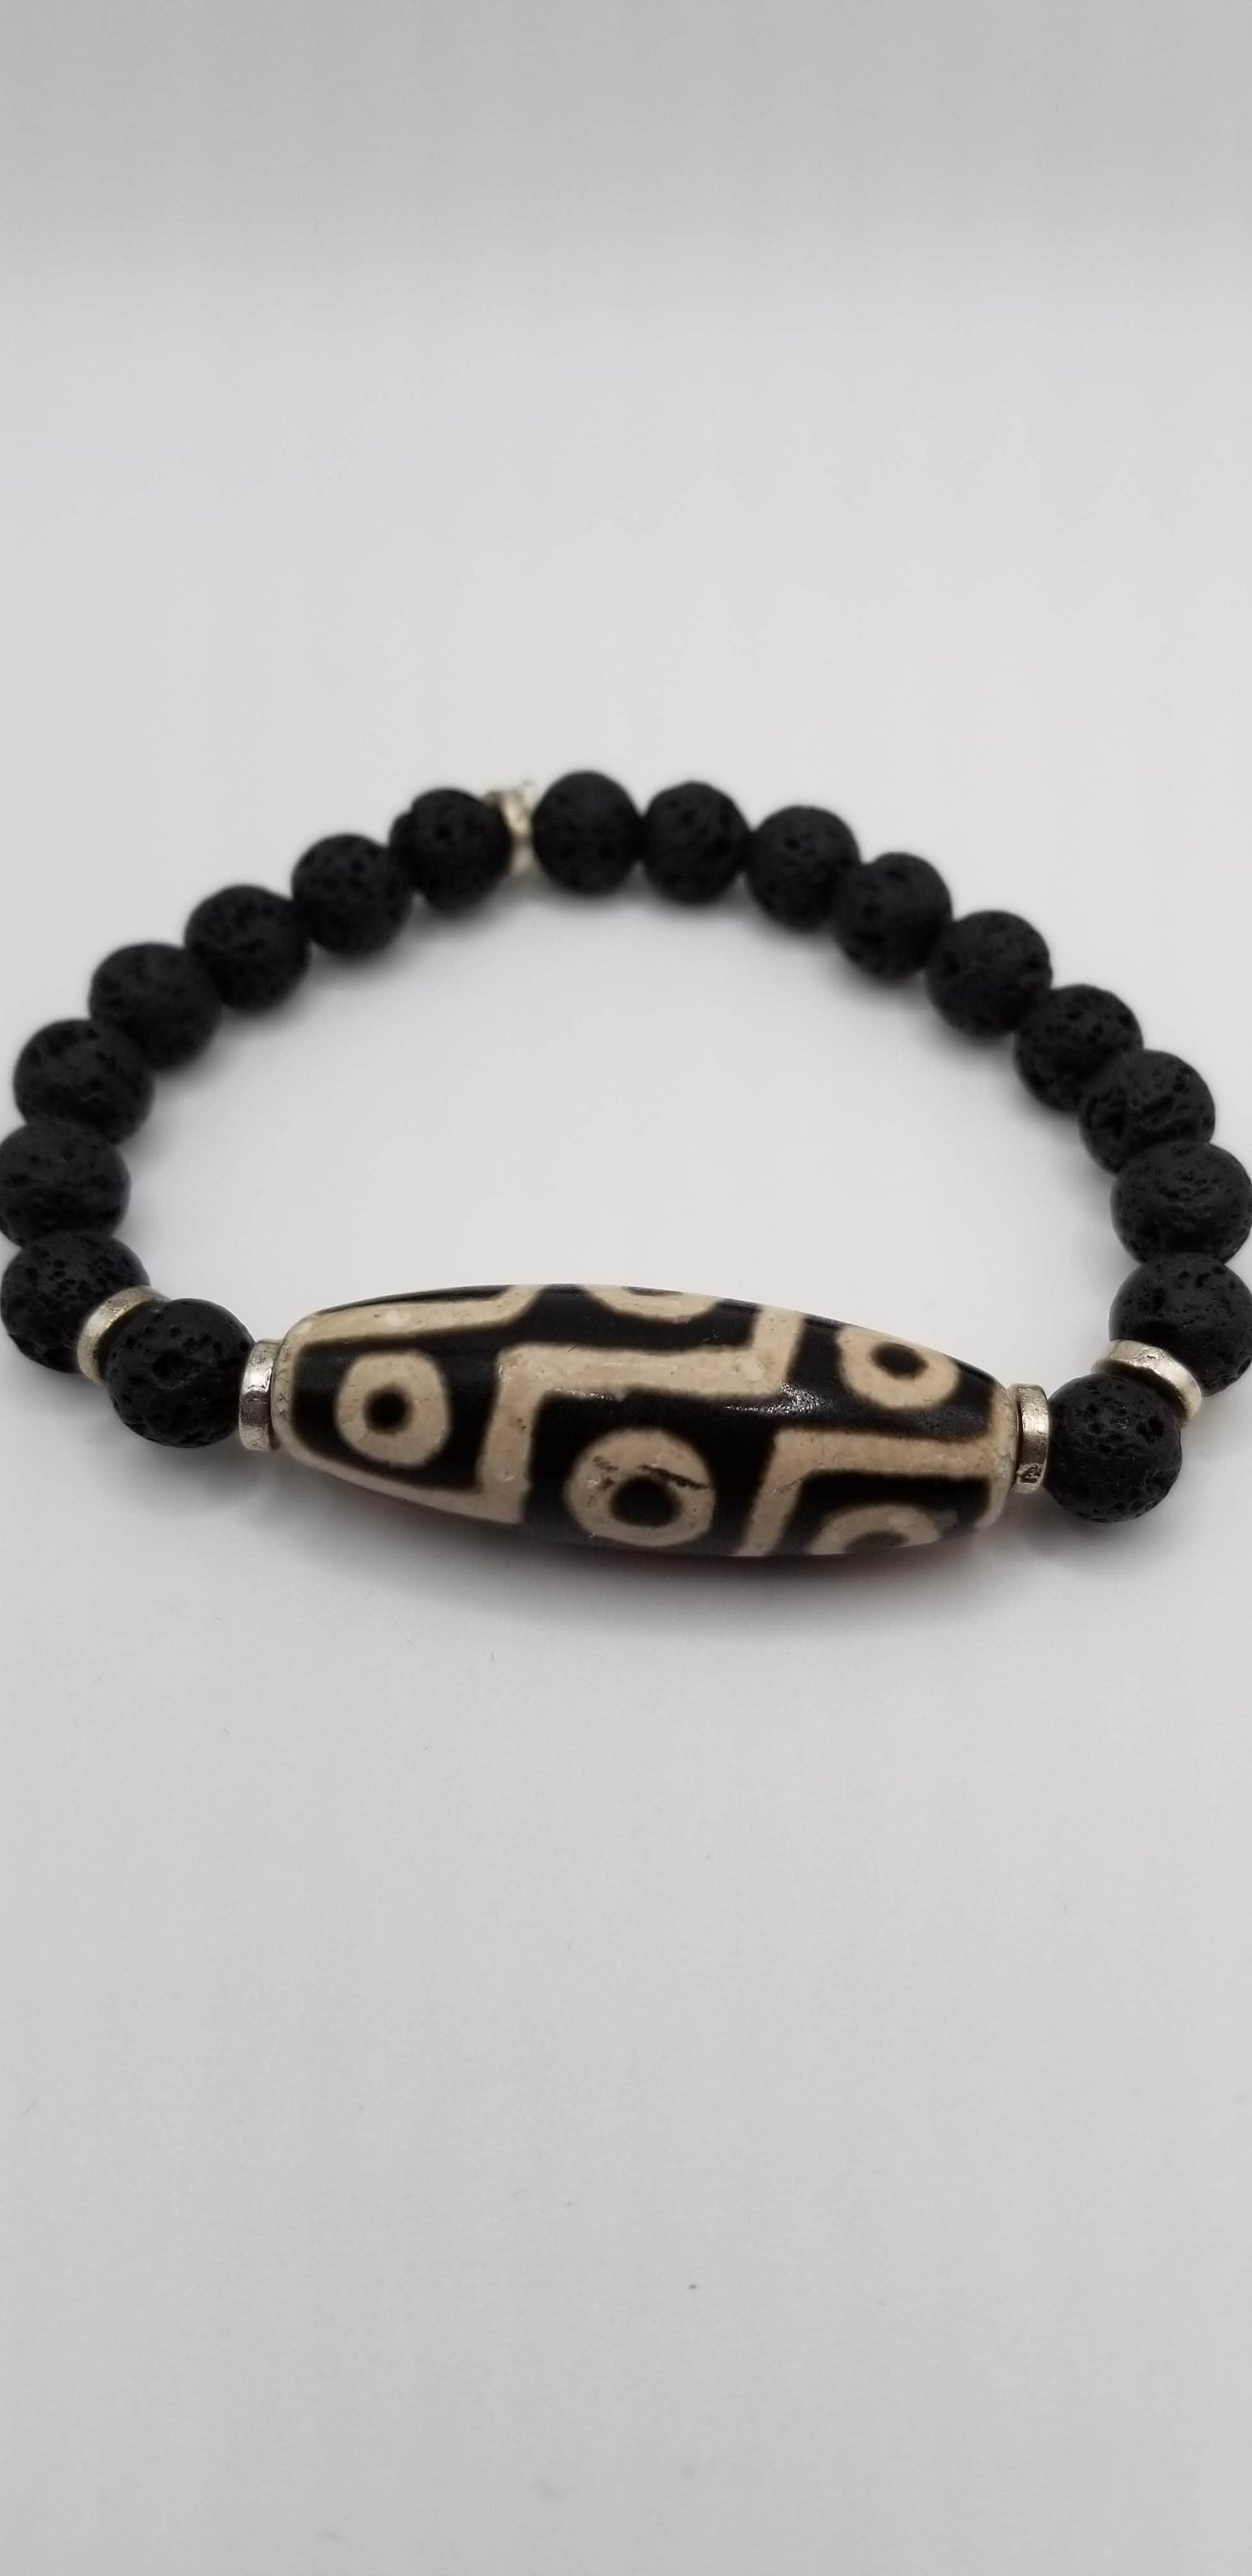 Handcrafted Jewelry By Teri C Tribal black and white bracelet